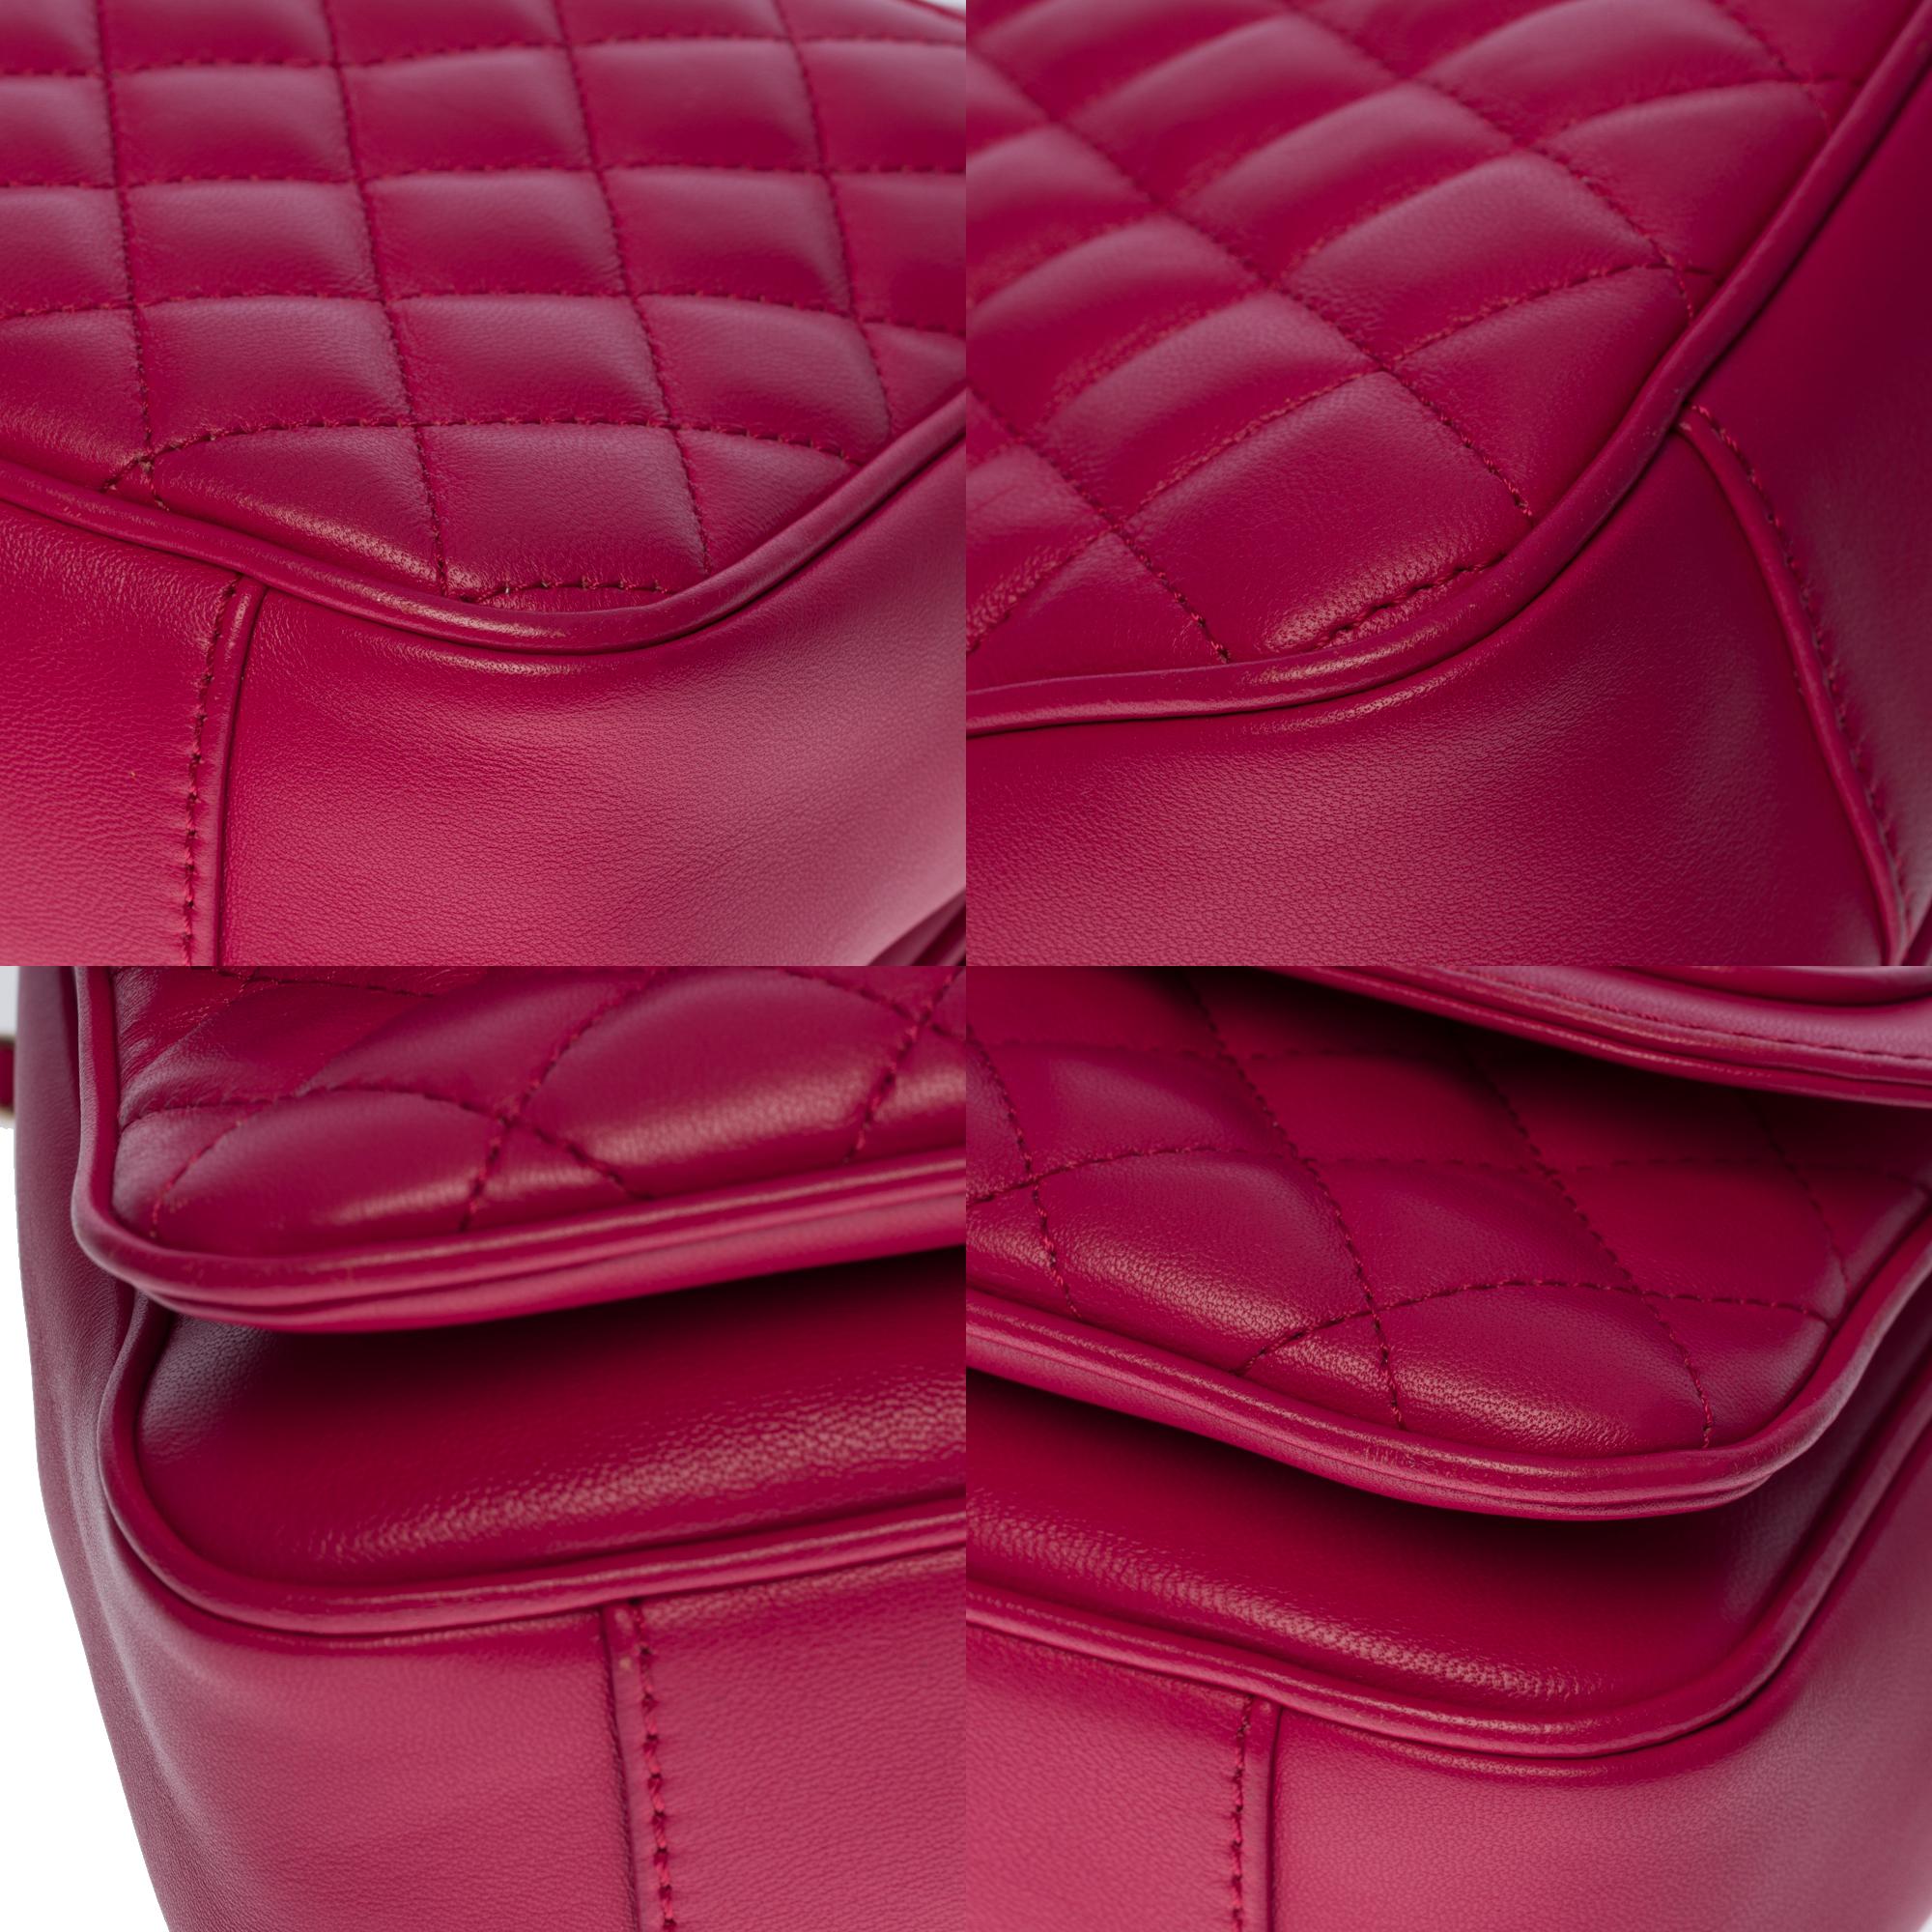 Chanel Timeless/Classic double flap shoulder bag in pink quilted ...